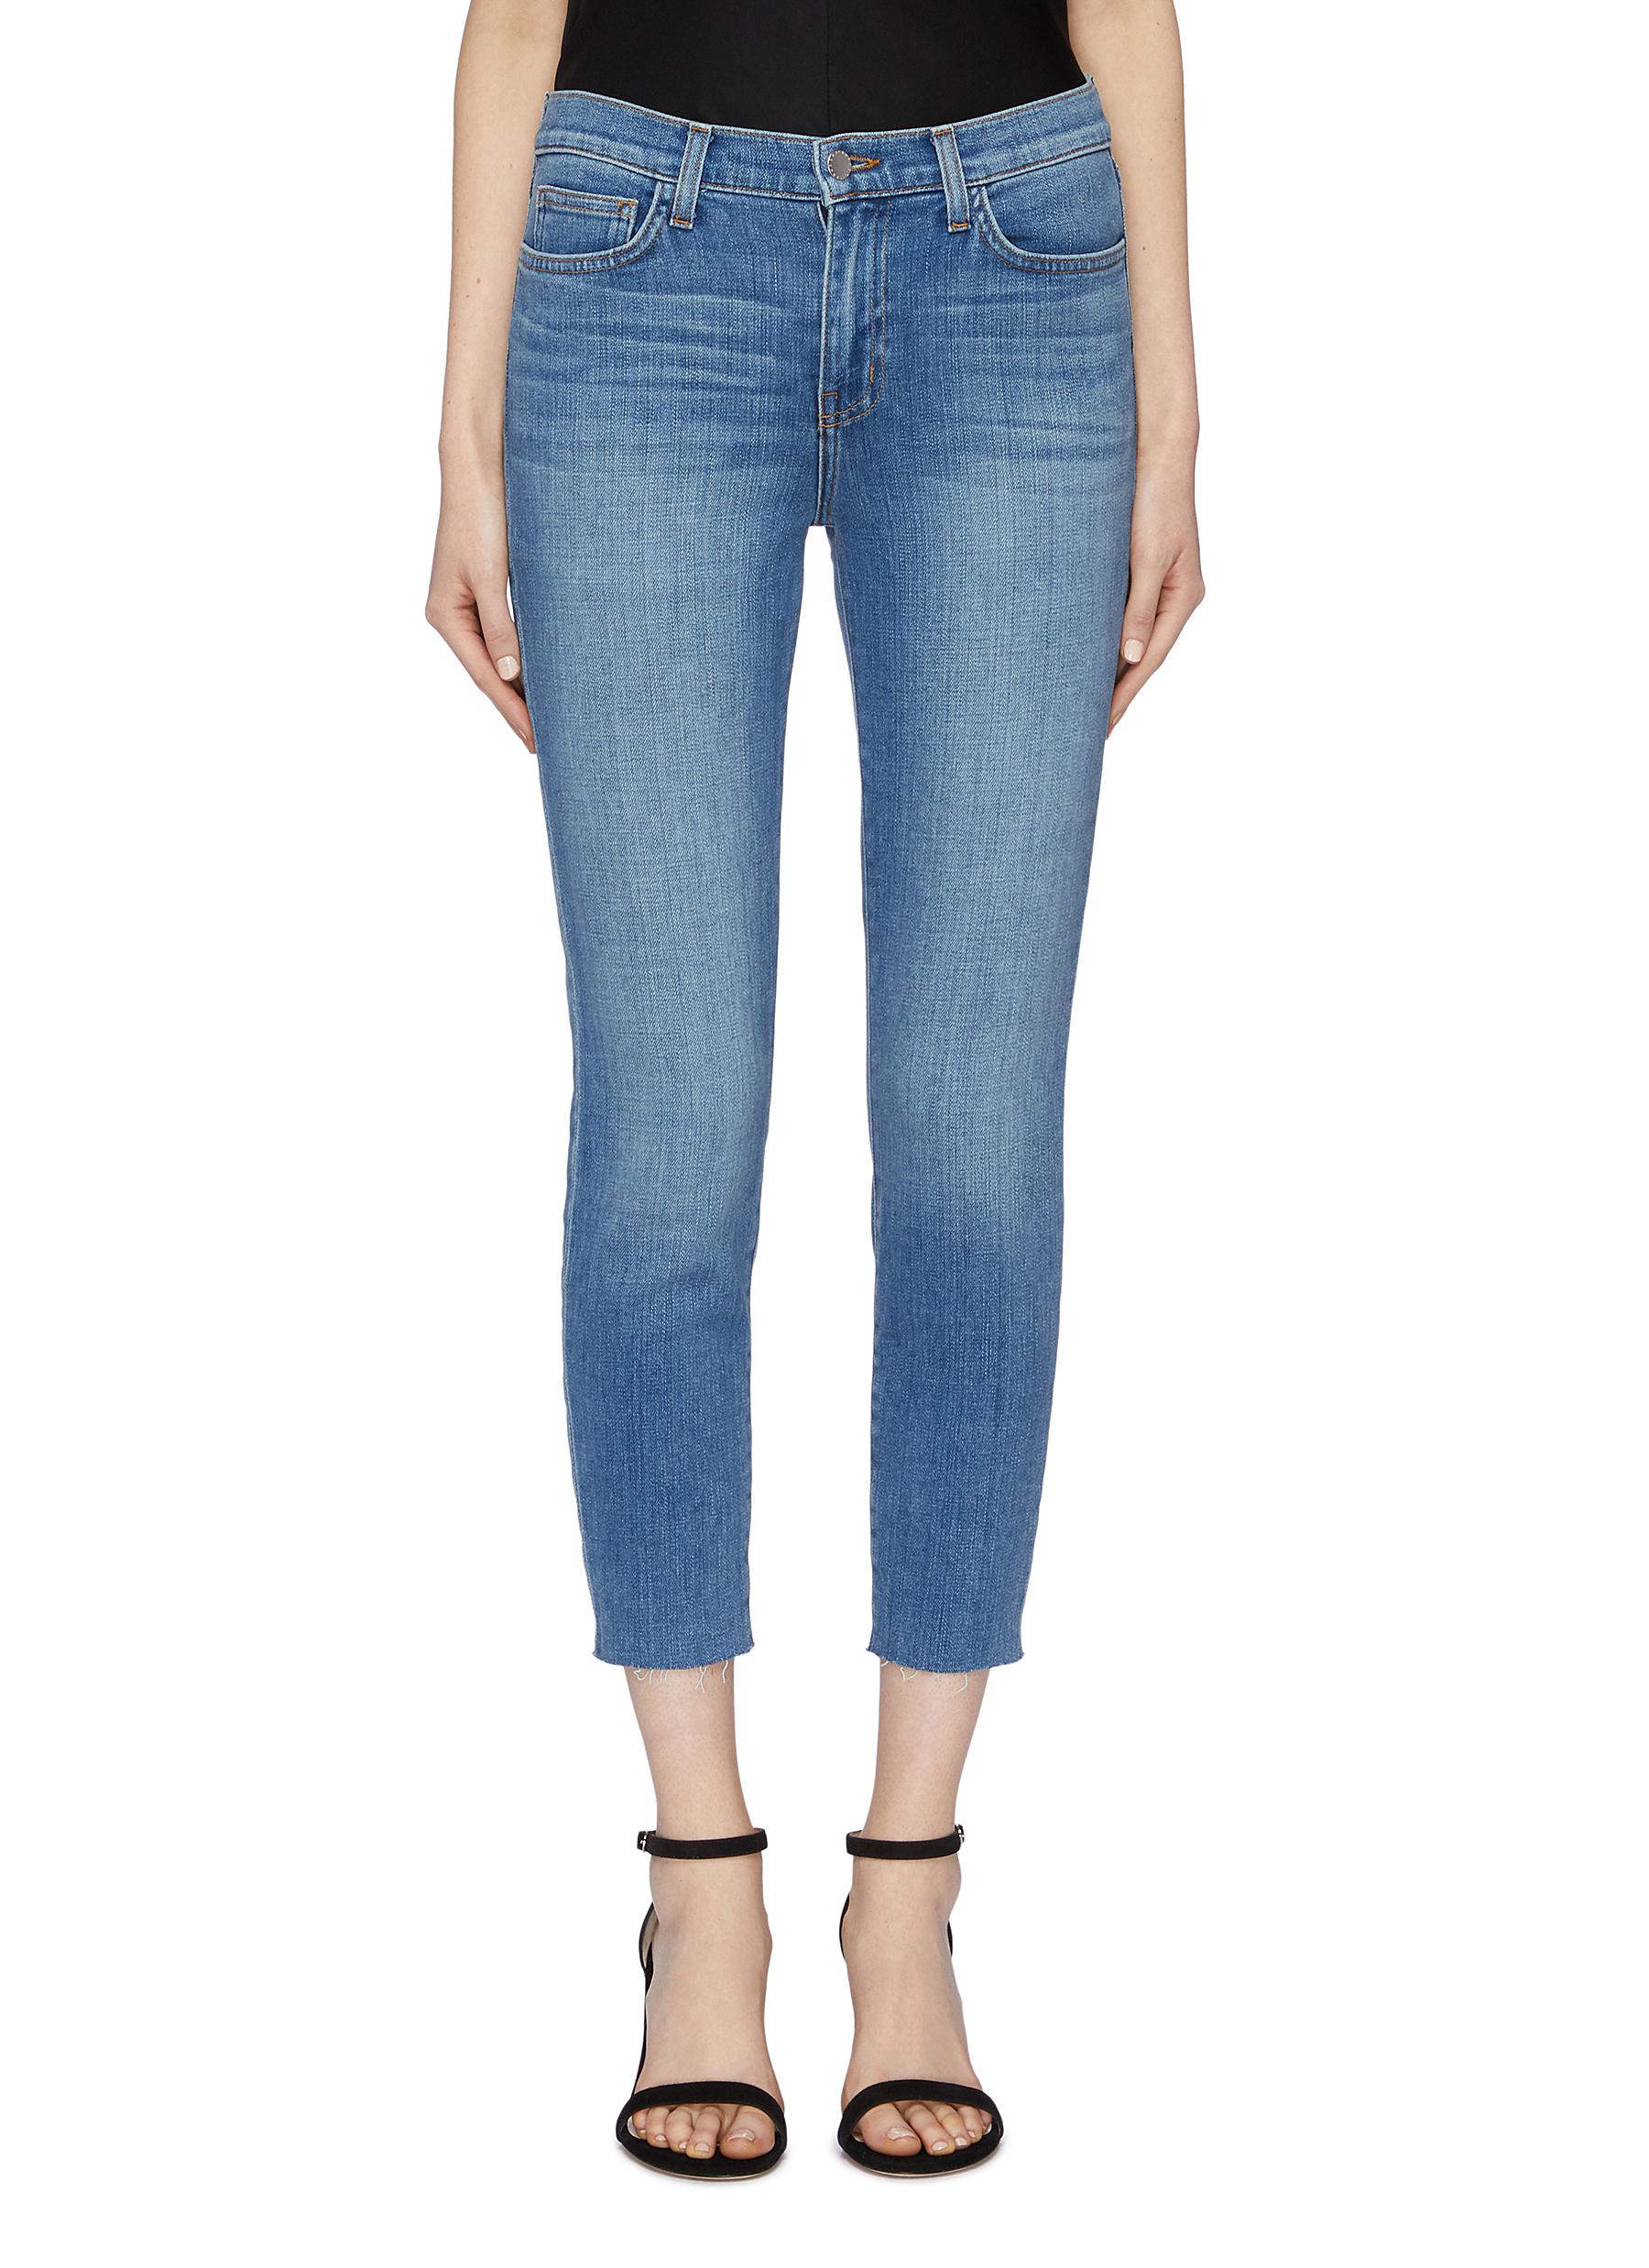 El Matador cropped skinny jeans by L’Agence